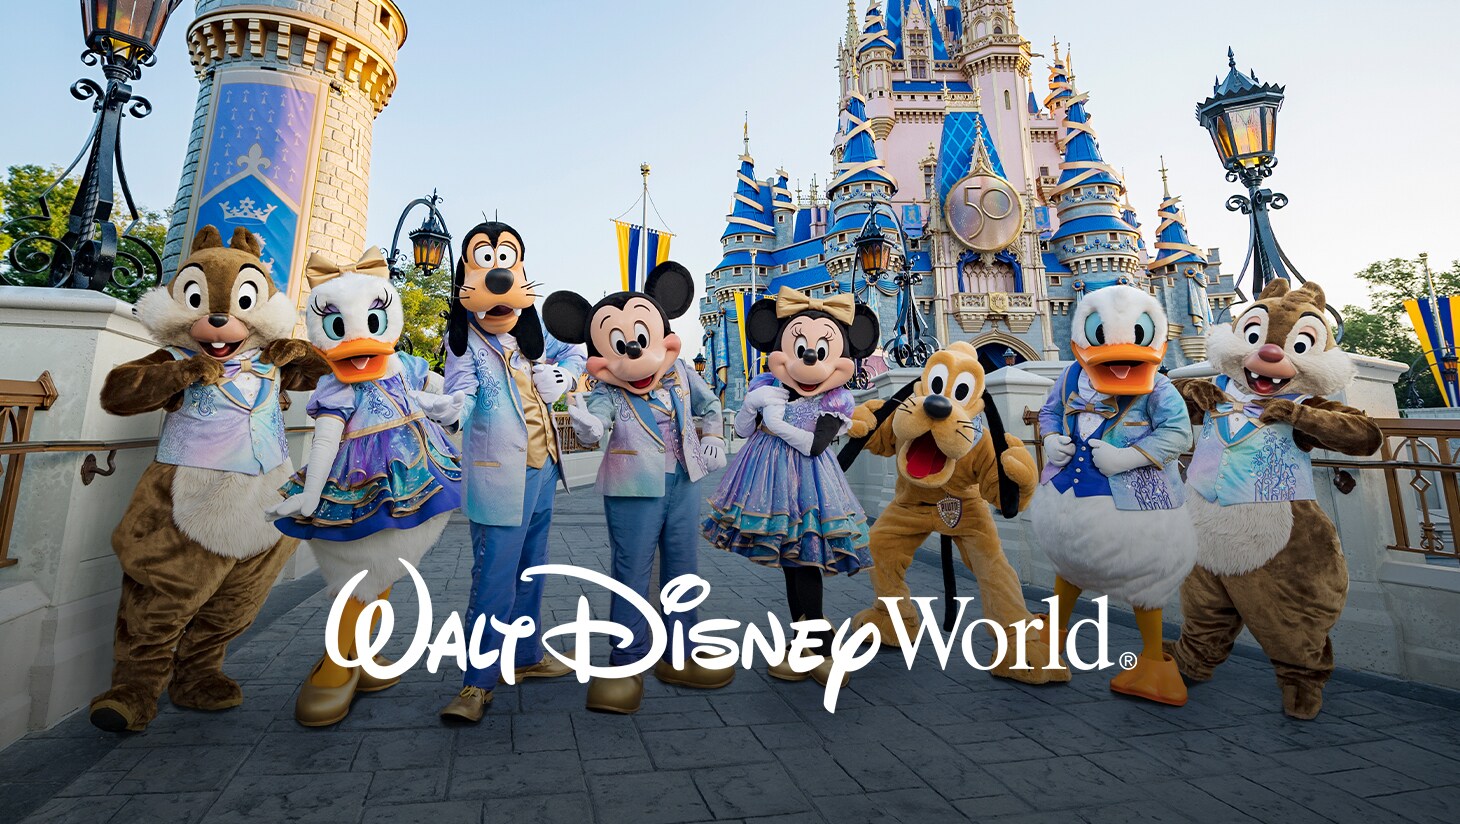 Chip, Daisy, Goofy, Mickey Mouse, Minnie Mouse, Pluto, Donald, and Dale pose in front of Cinderella Castle at Walt Disney World